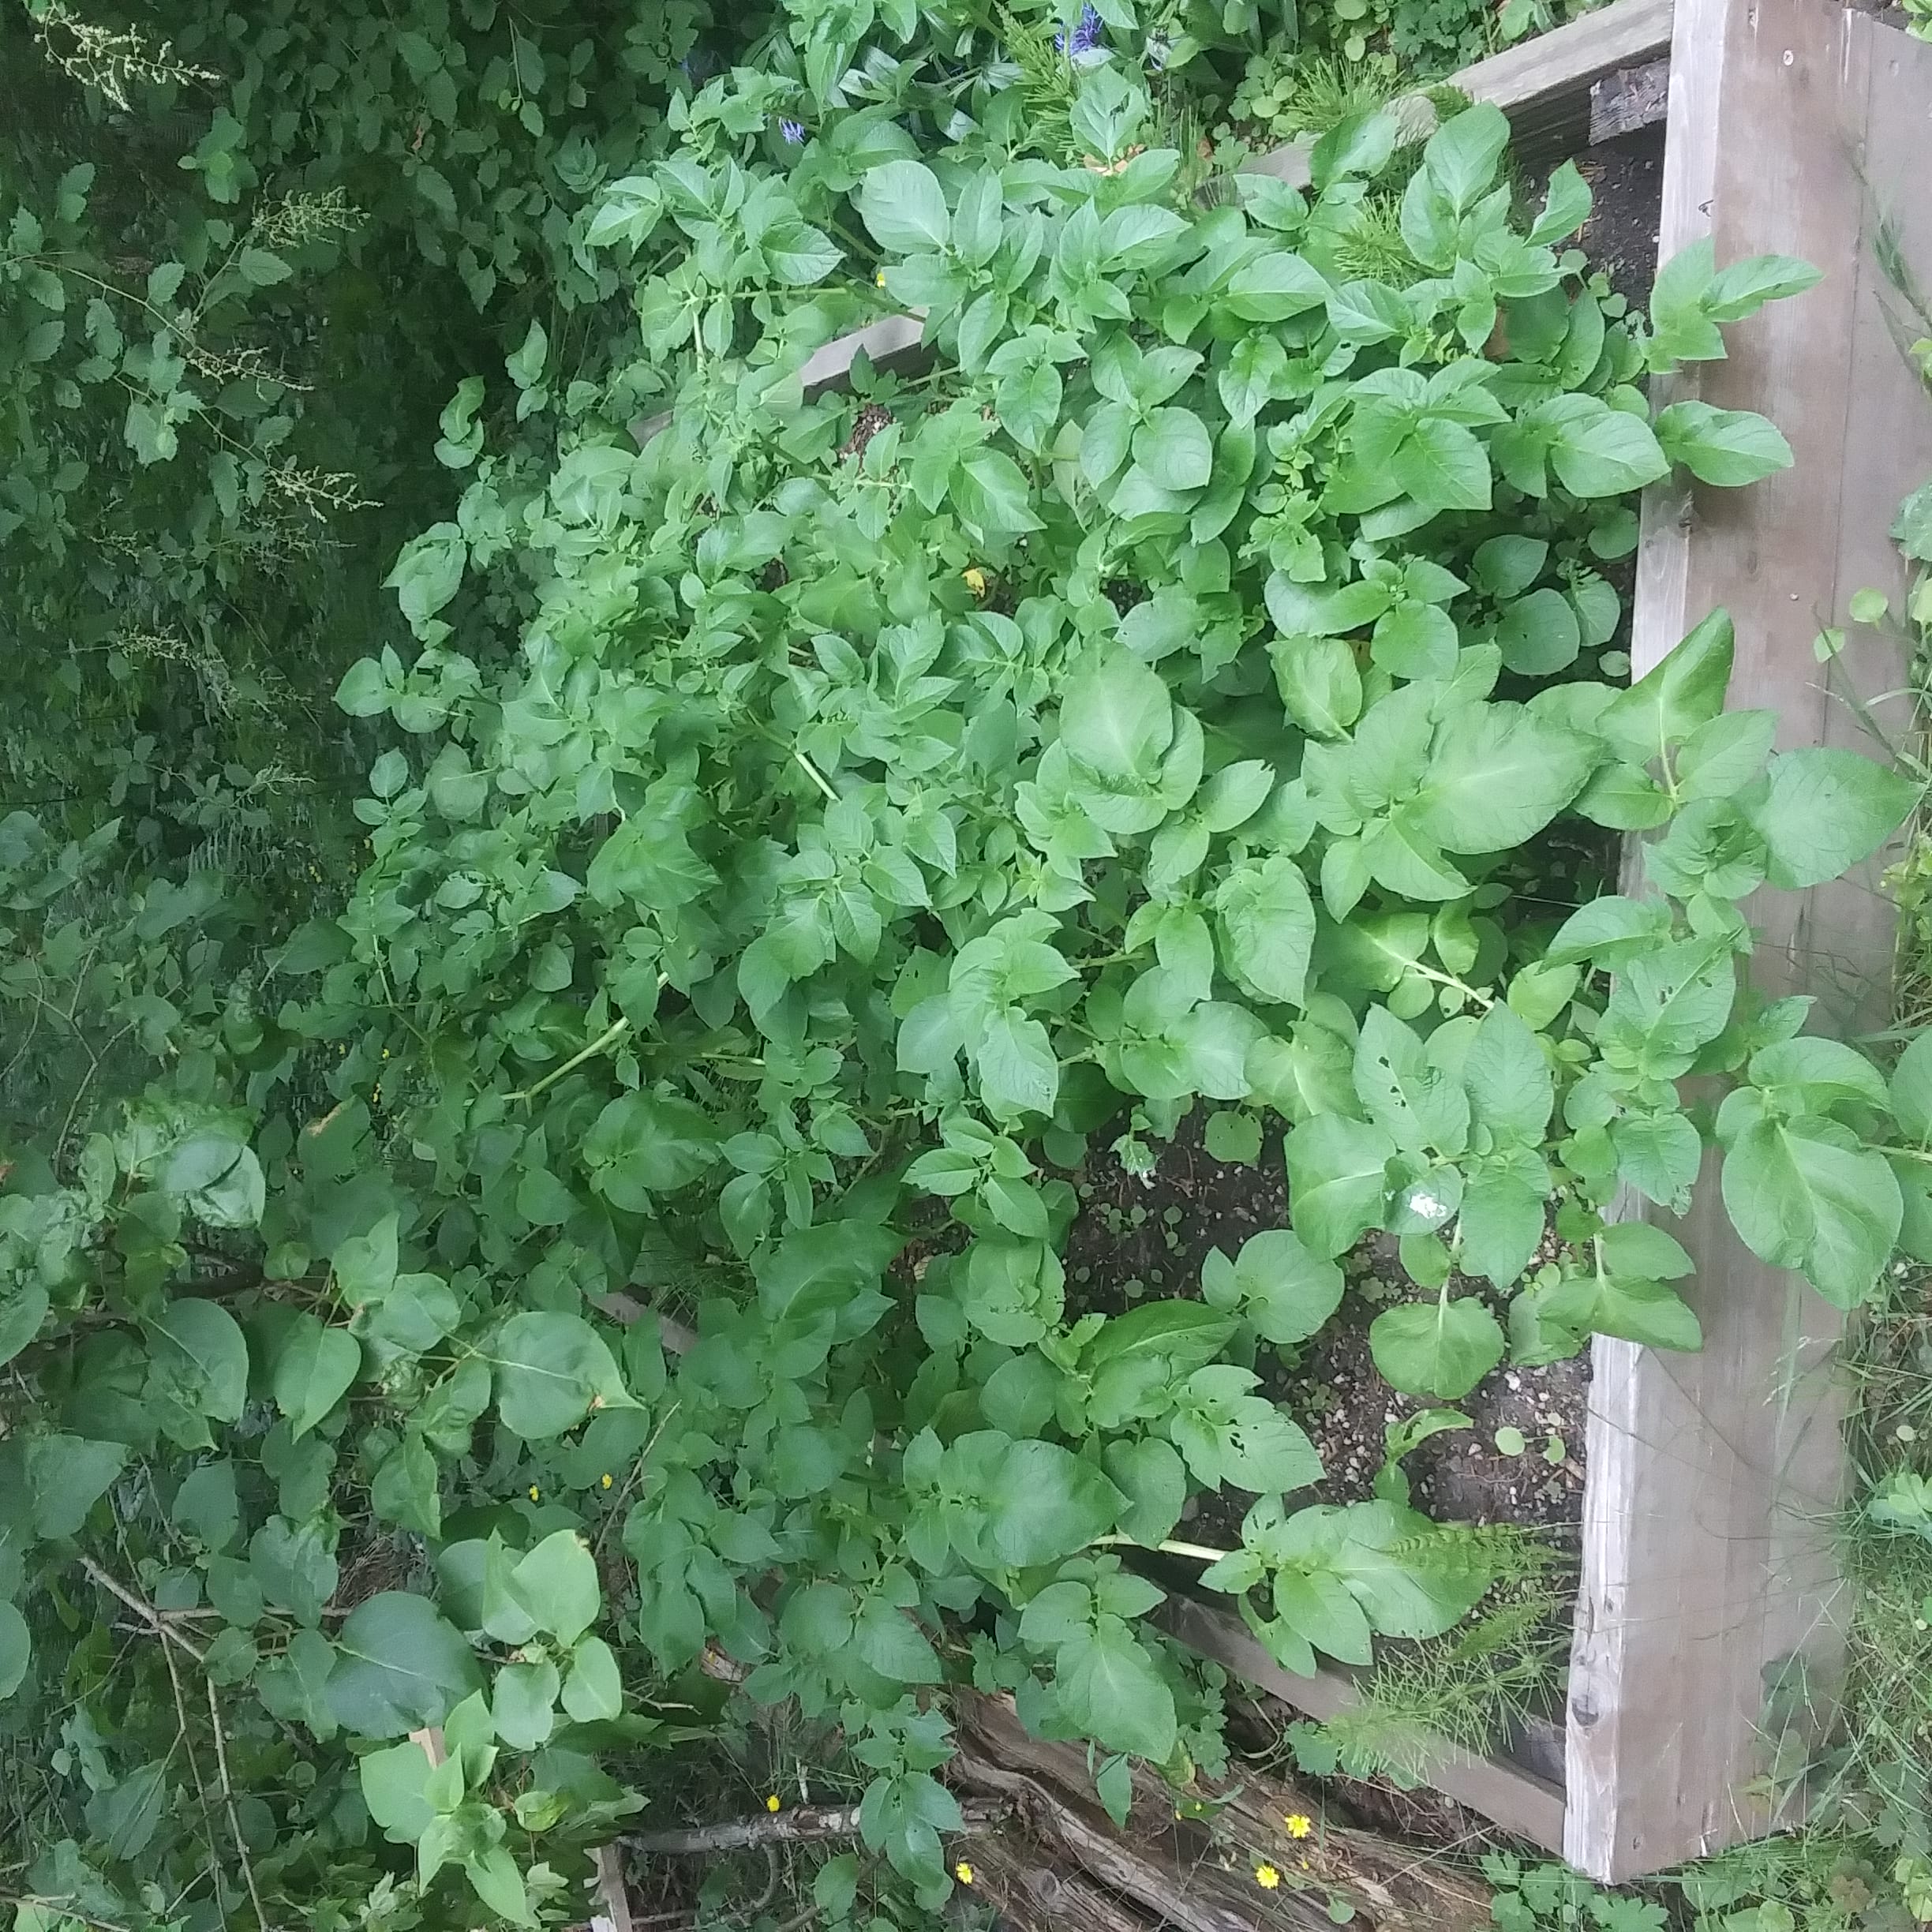 Multiple large potato plants growing in a raised garden bed.